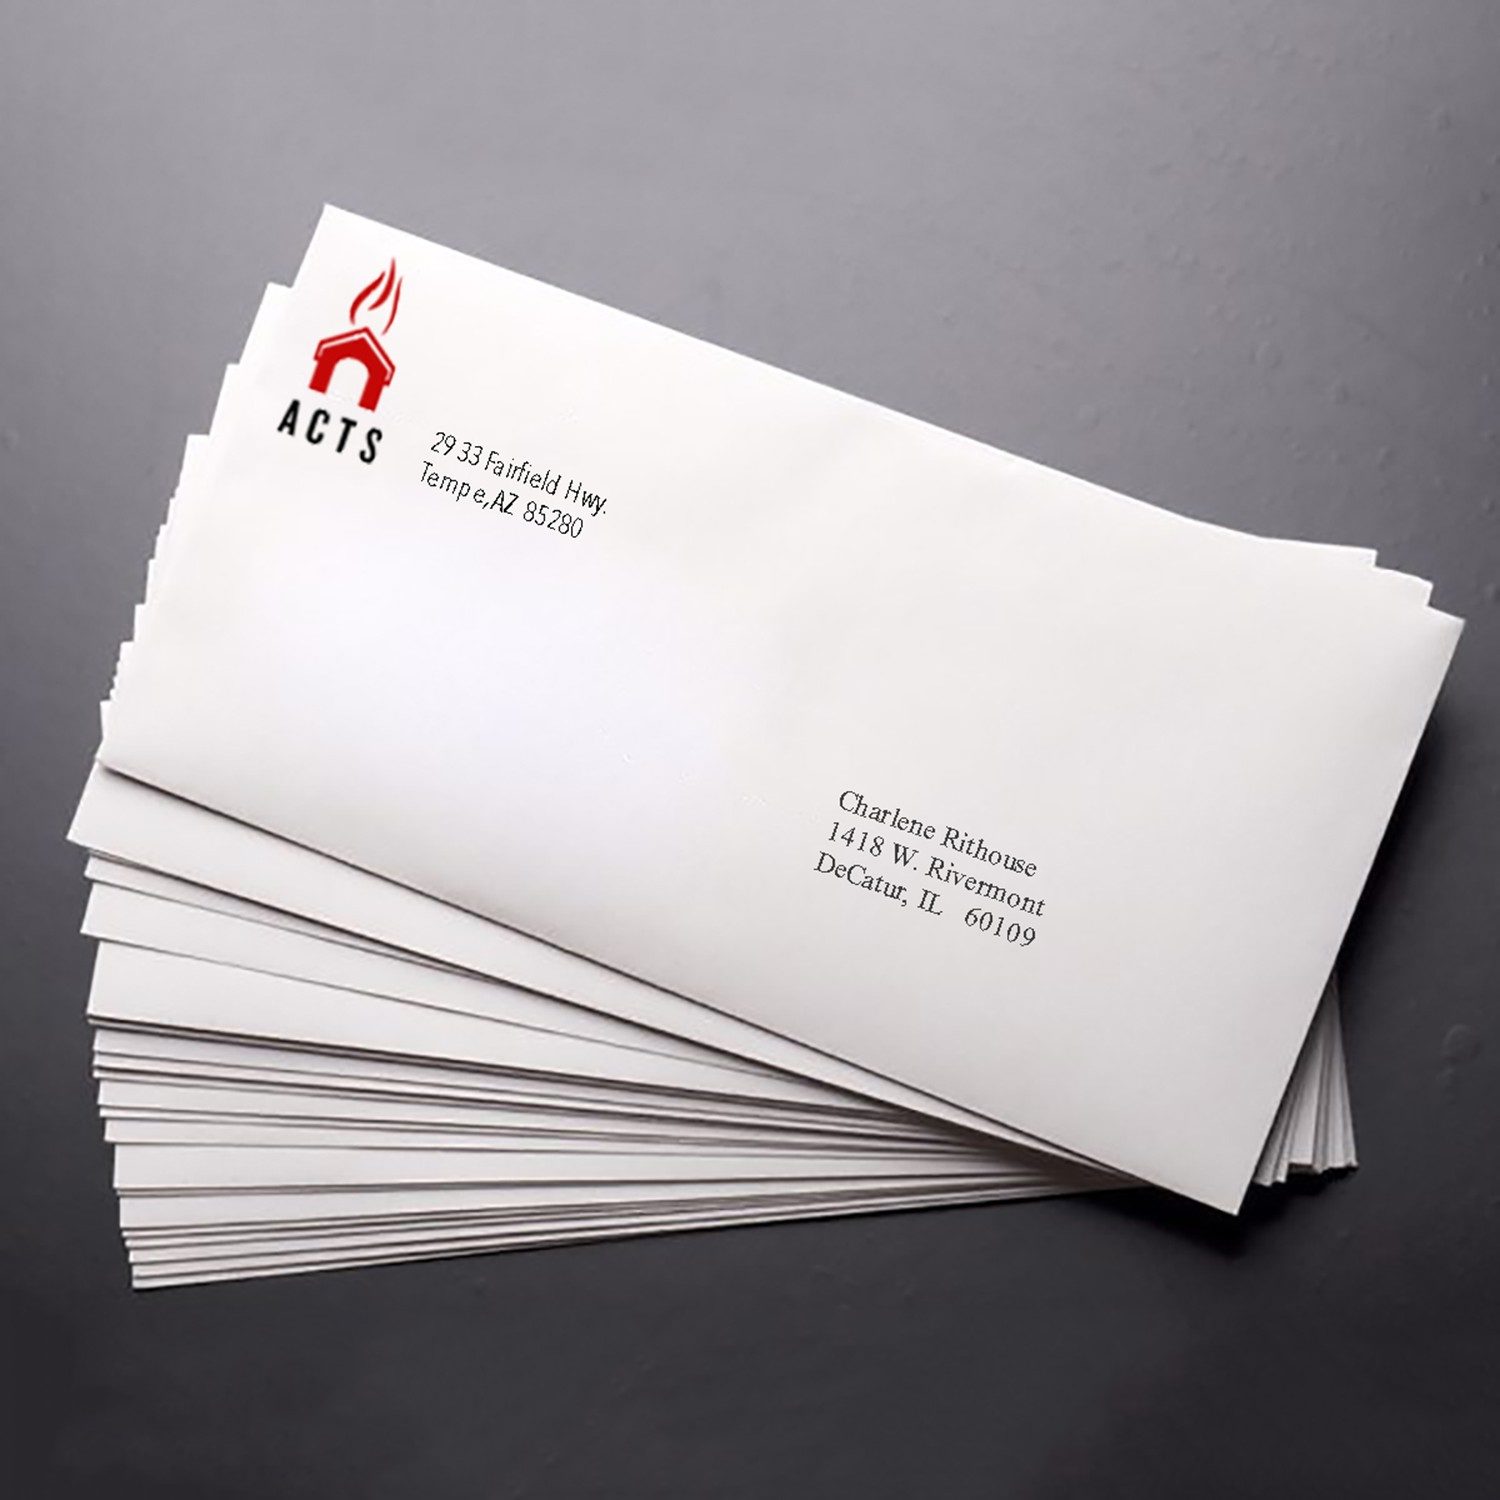 Mailing Services for Missionary Support and Fundraising - MissionaryCards.com